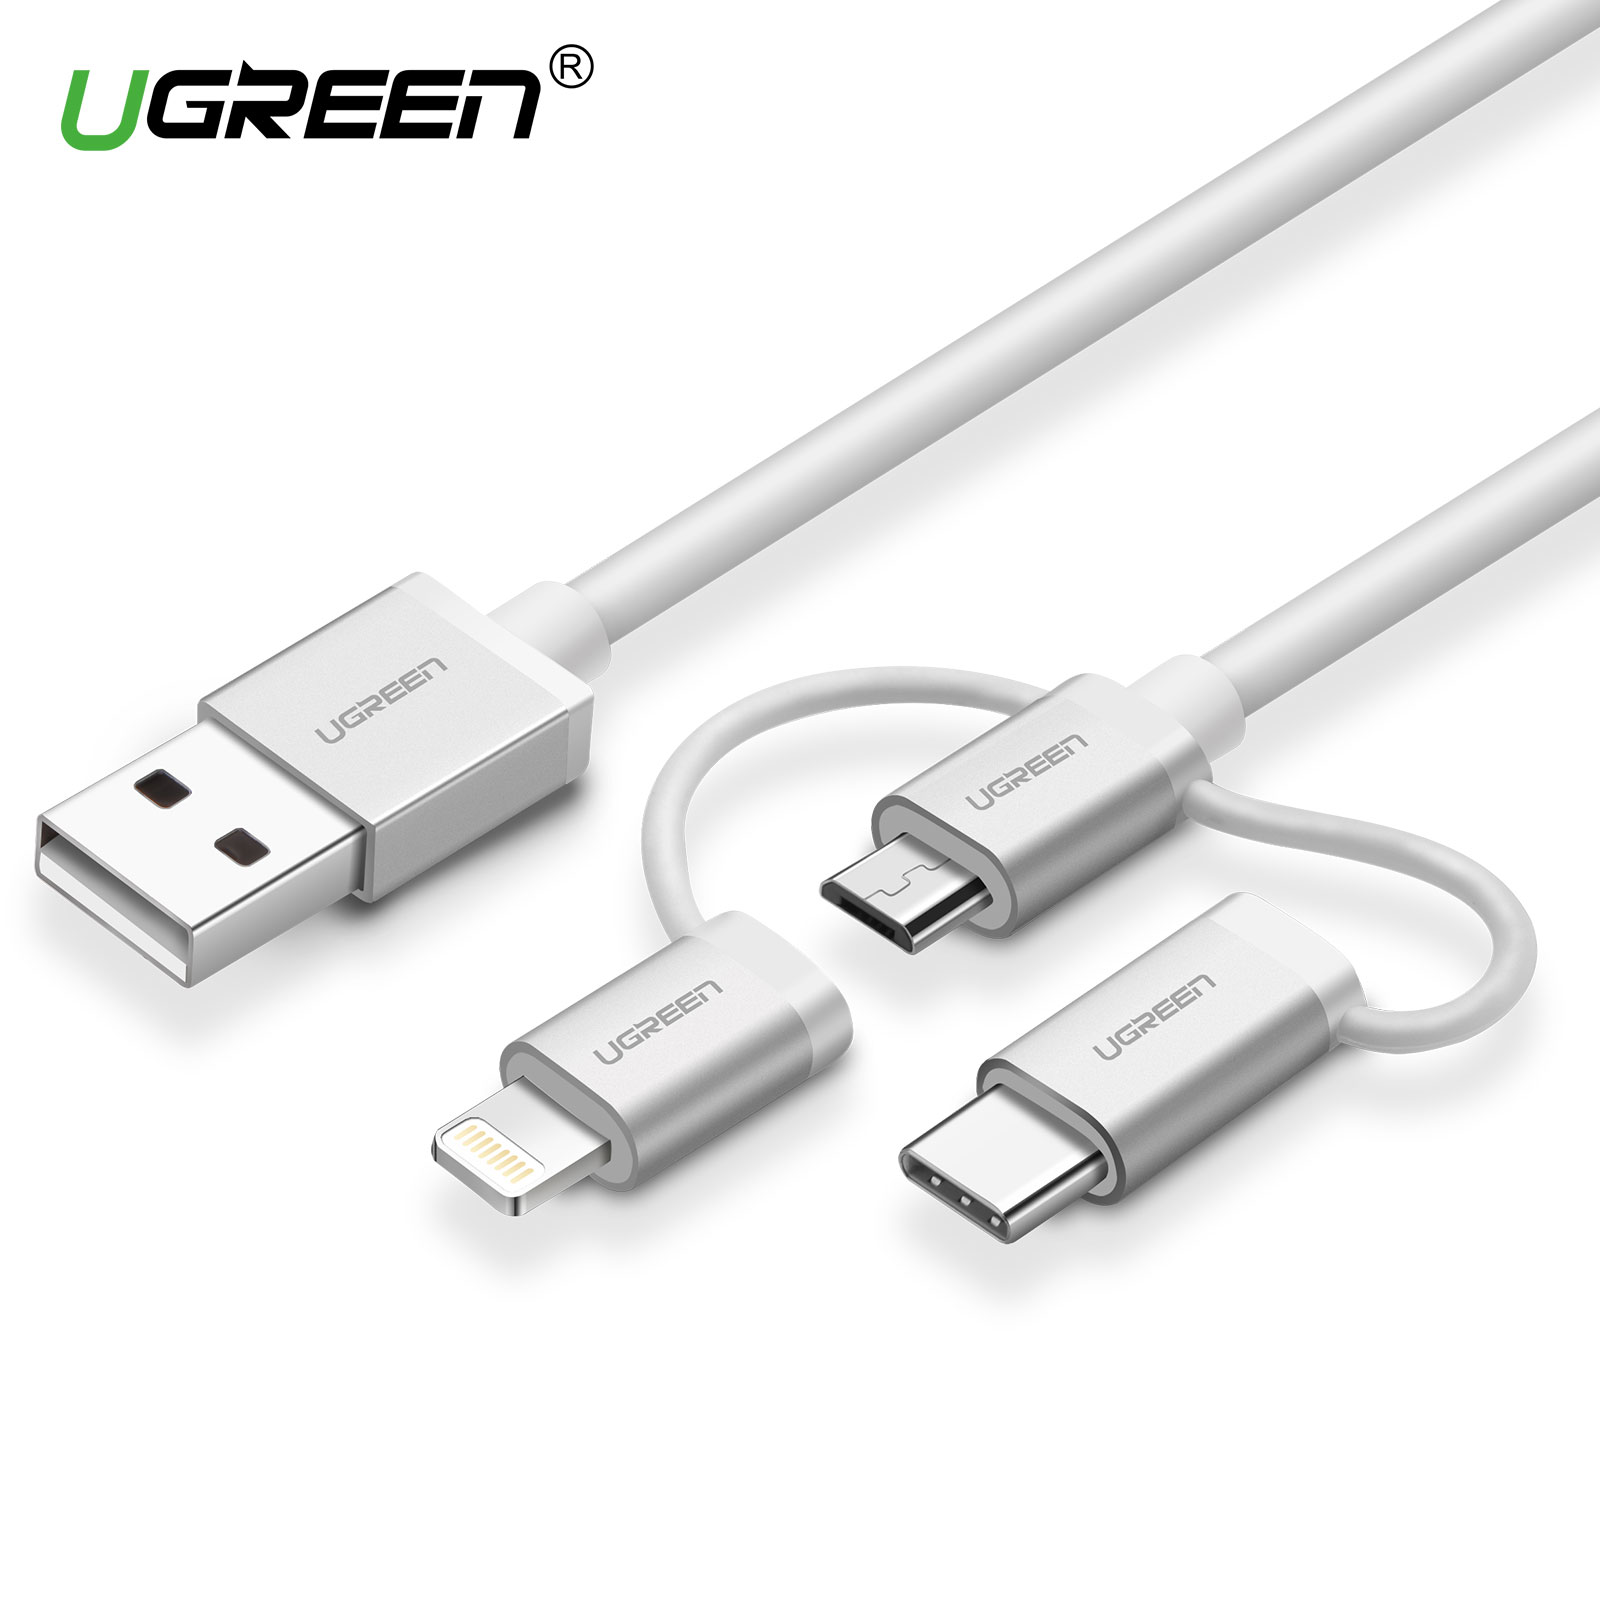 UGREEN Lightning Cable, USB A to Micro USB and Lightning Cable for